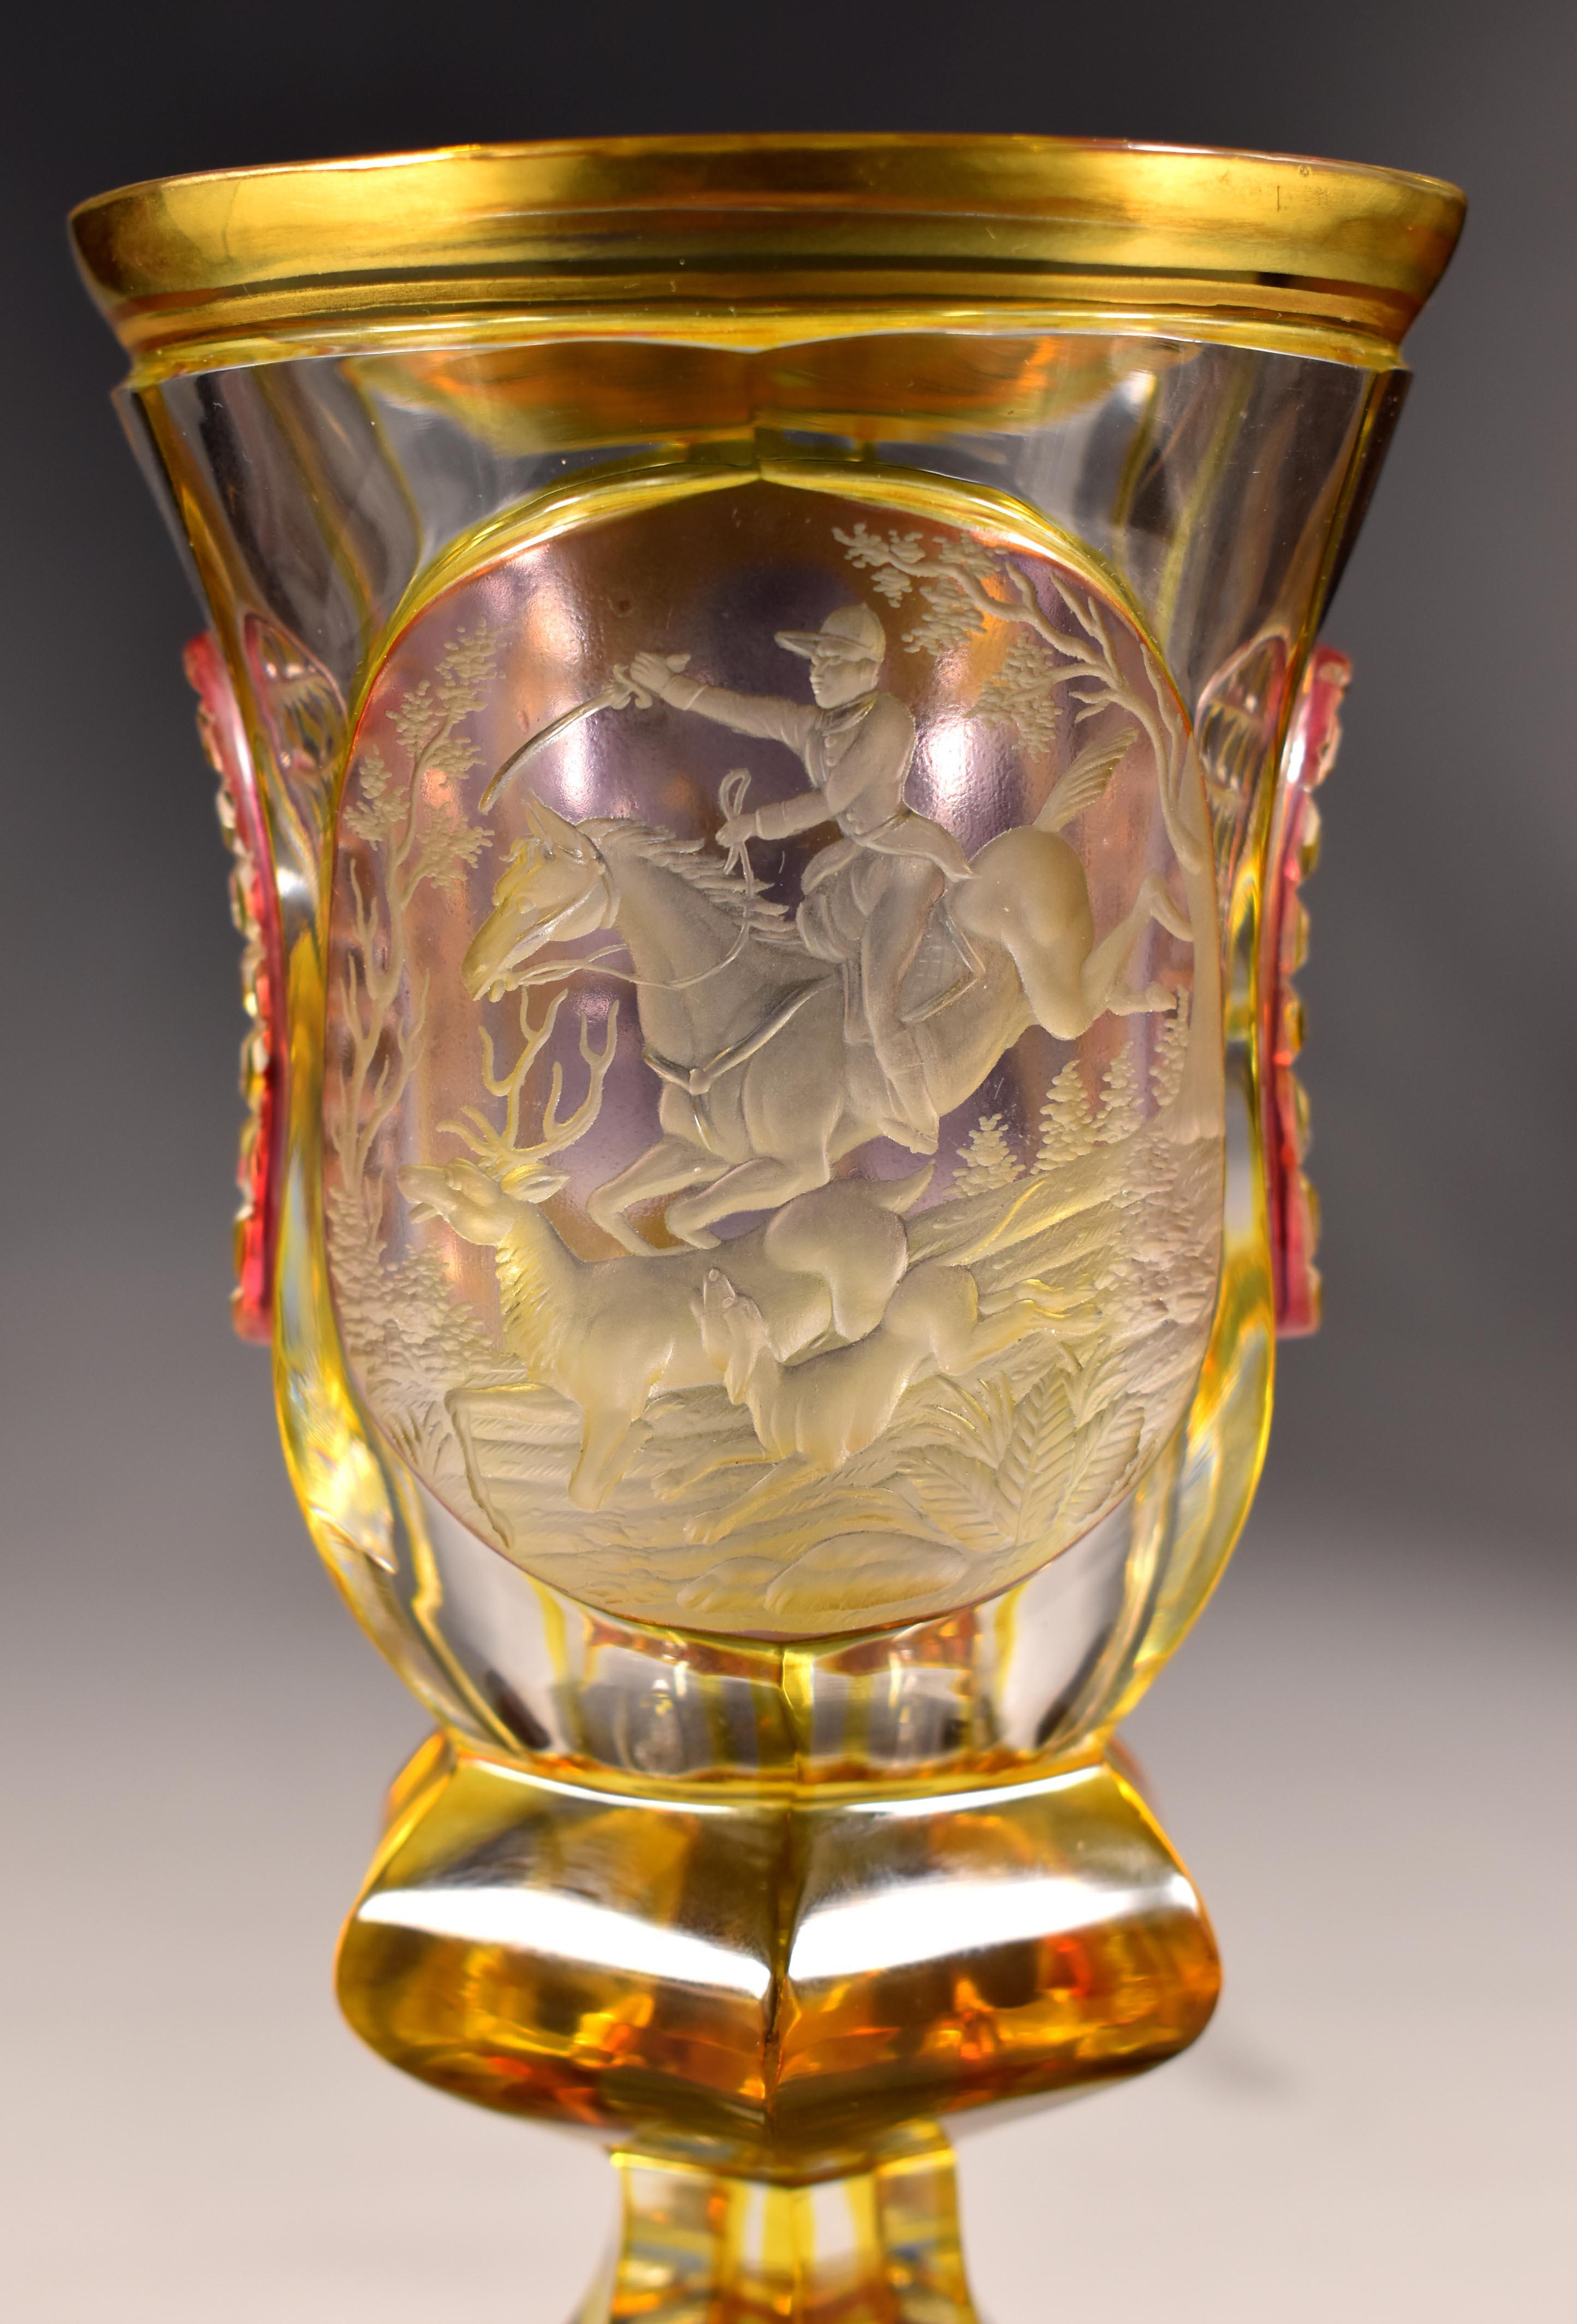 19th Century Antique Engraved Goblet Hunting motif 19-20 century Bohemian Glass For Sale